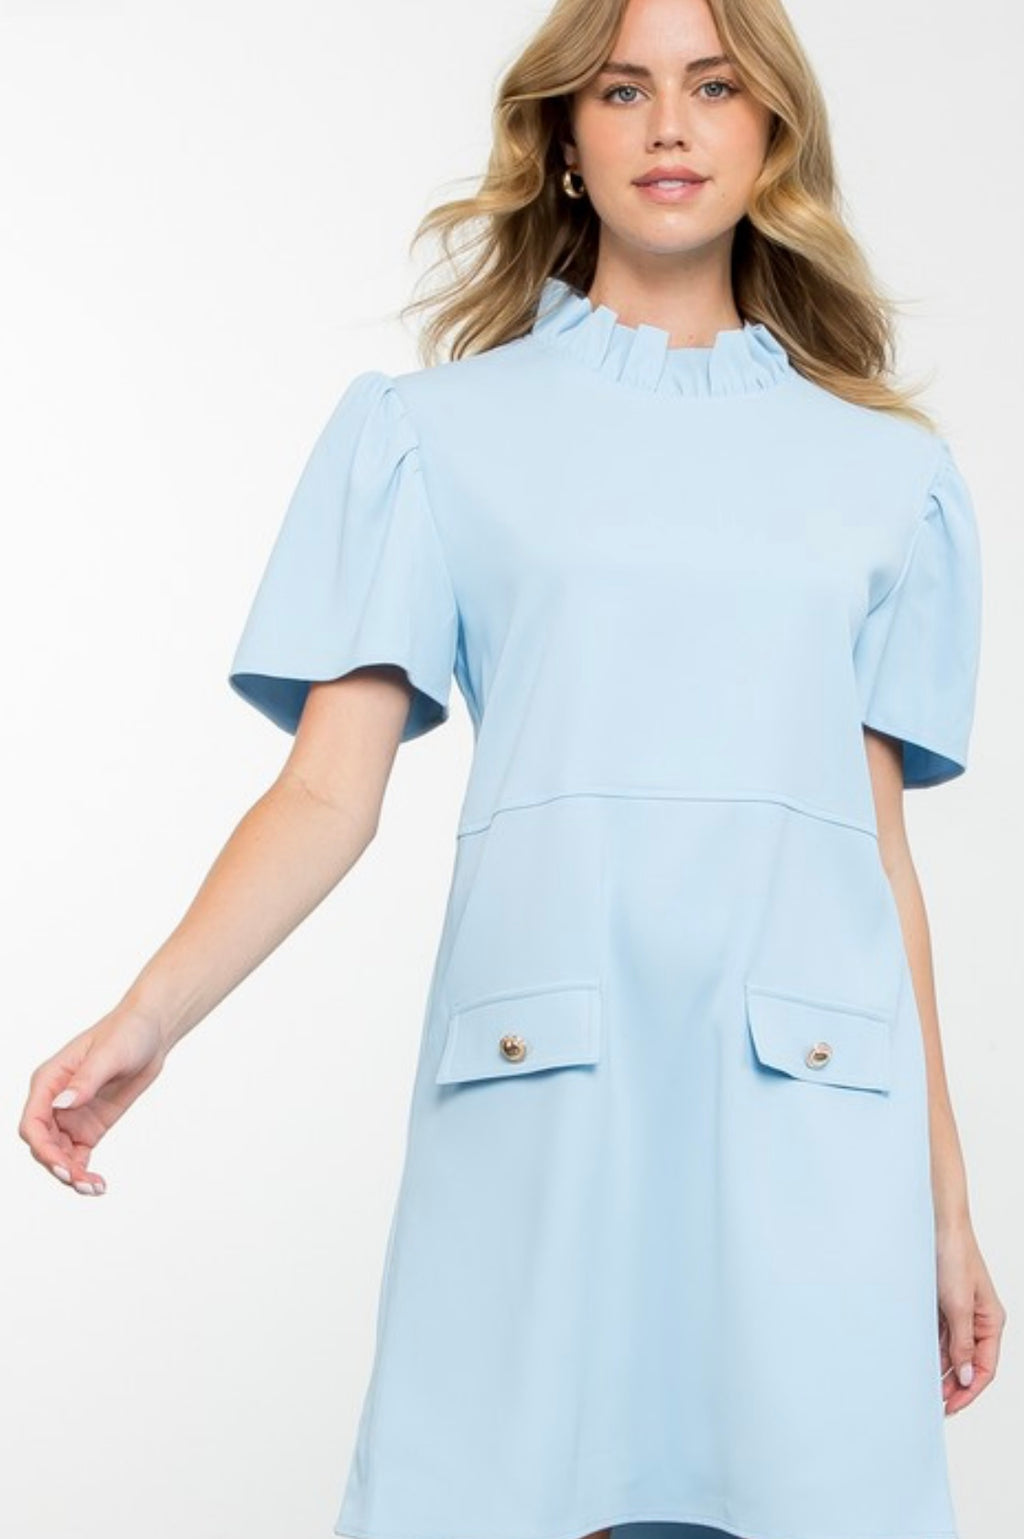 Baby Blue Short Sleeve Dress with Gold Button Pocket Detail